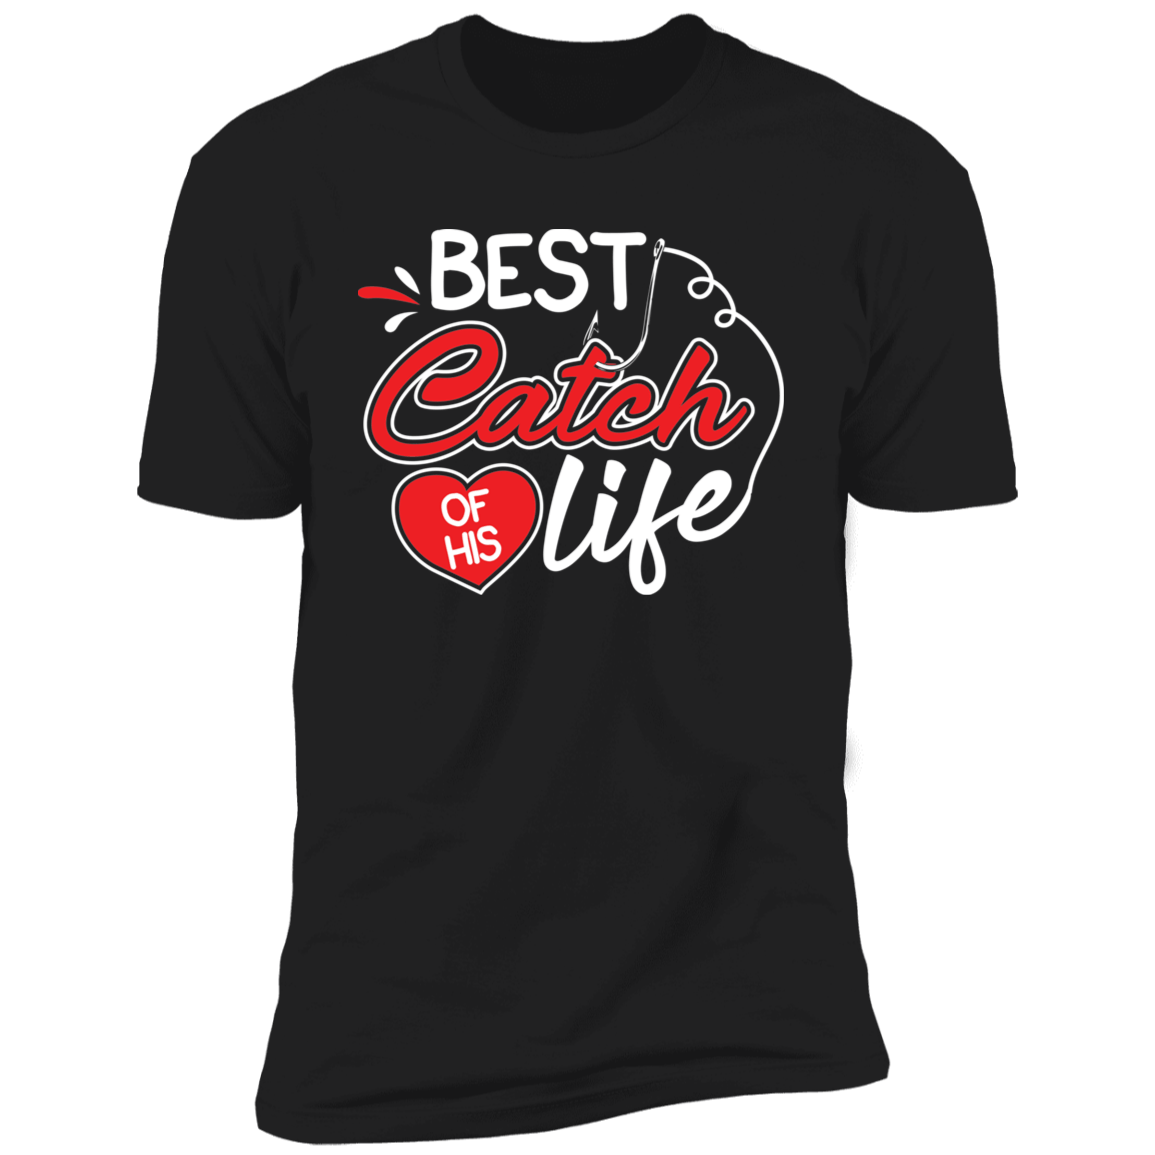 One Great Fisherman & Best Catch Of His Life Fishing Couples Tees